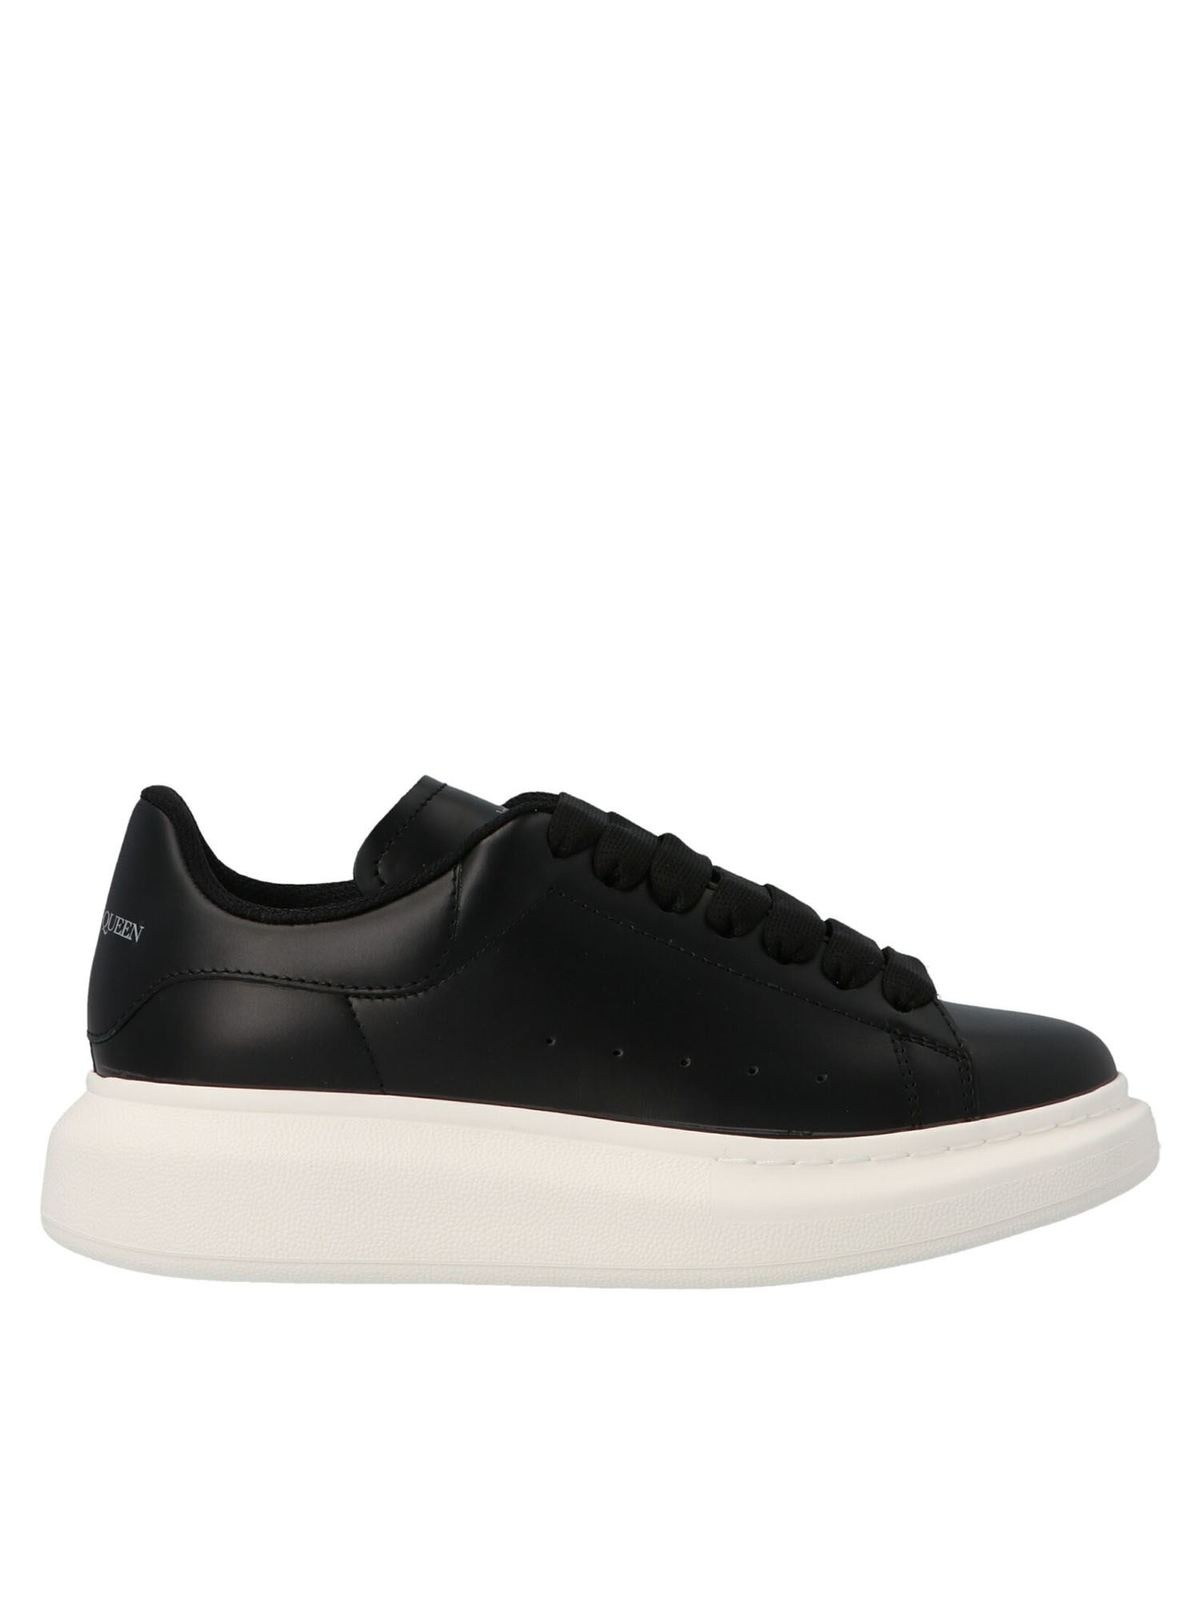 ALEXANDER MCQUEEN OVERSIZE SNEAKERS IN BLACK AND WHITE